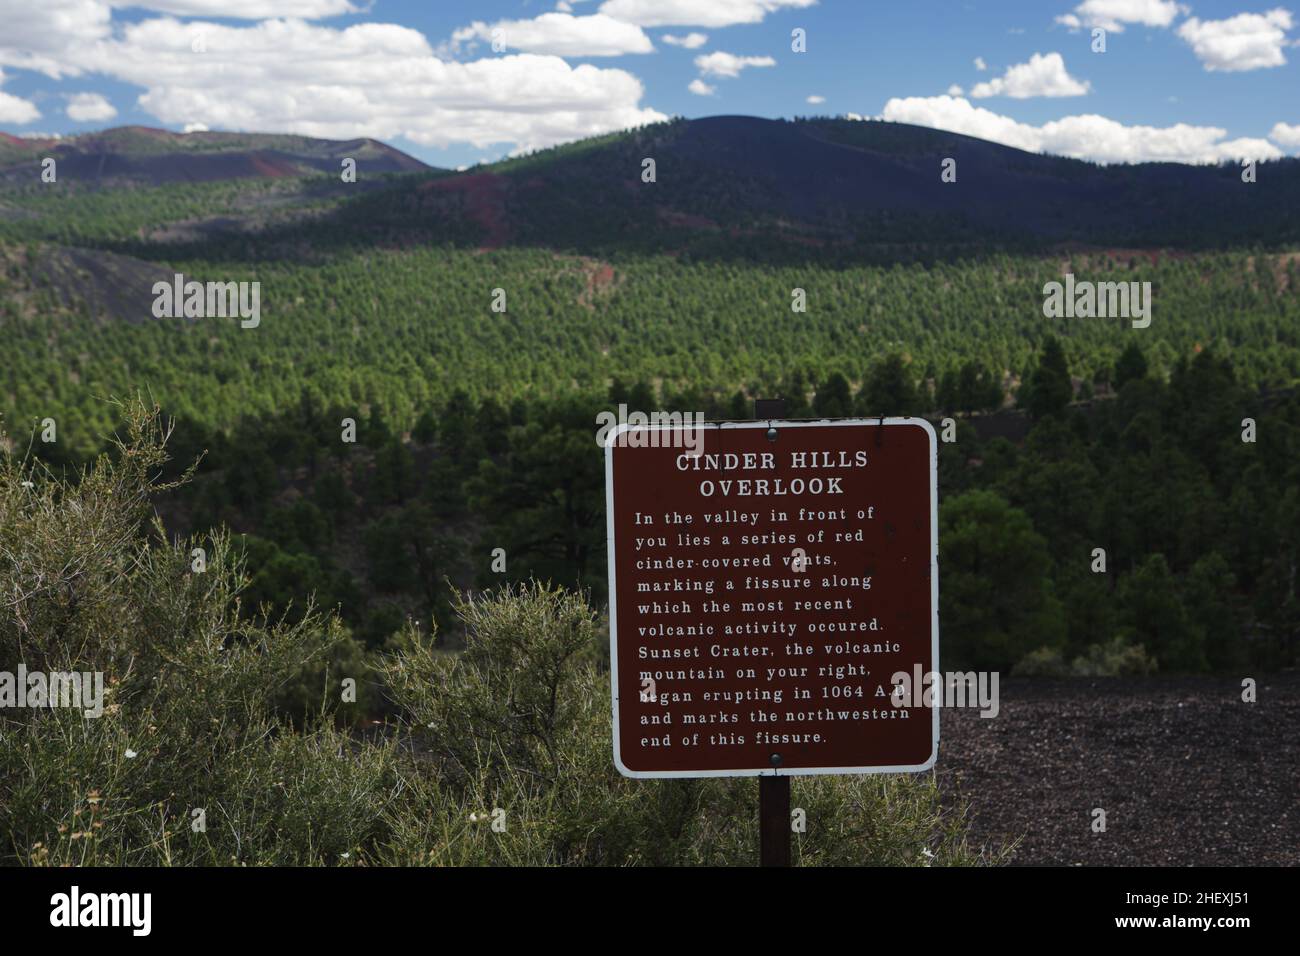 Cinder Hills Overlook sign at the observation point in Sunset Crater Volcano National Monument, AZ Stock Photo